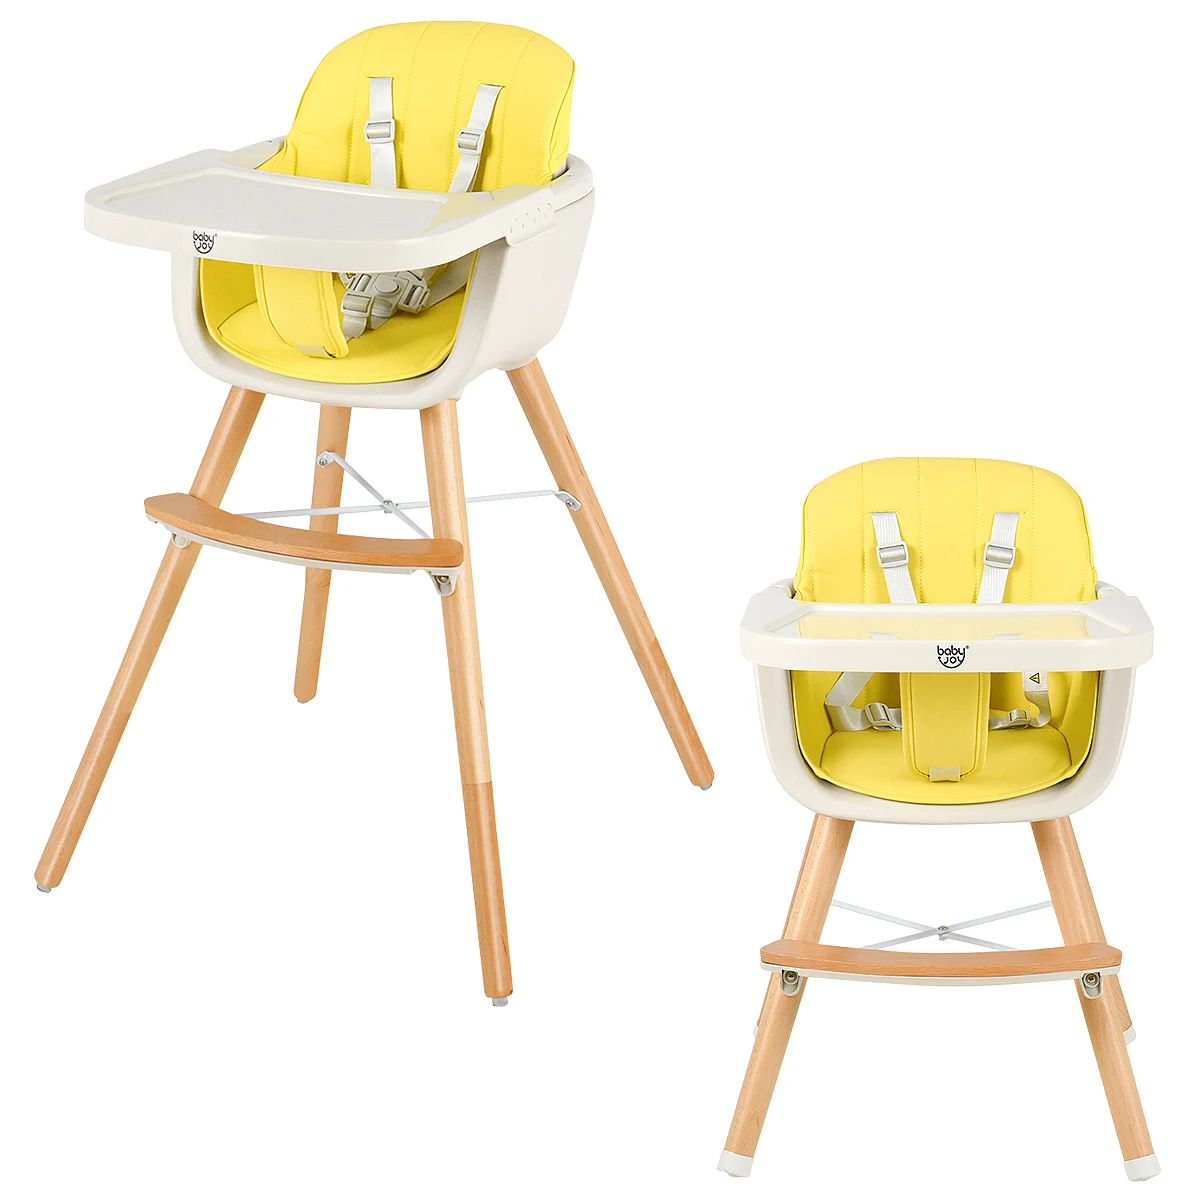 3 in 1 Convertible Wooden High Chair Baby Toddler Highchair w/ Cushion Yellow